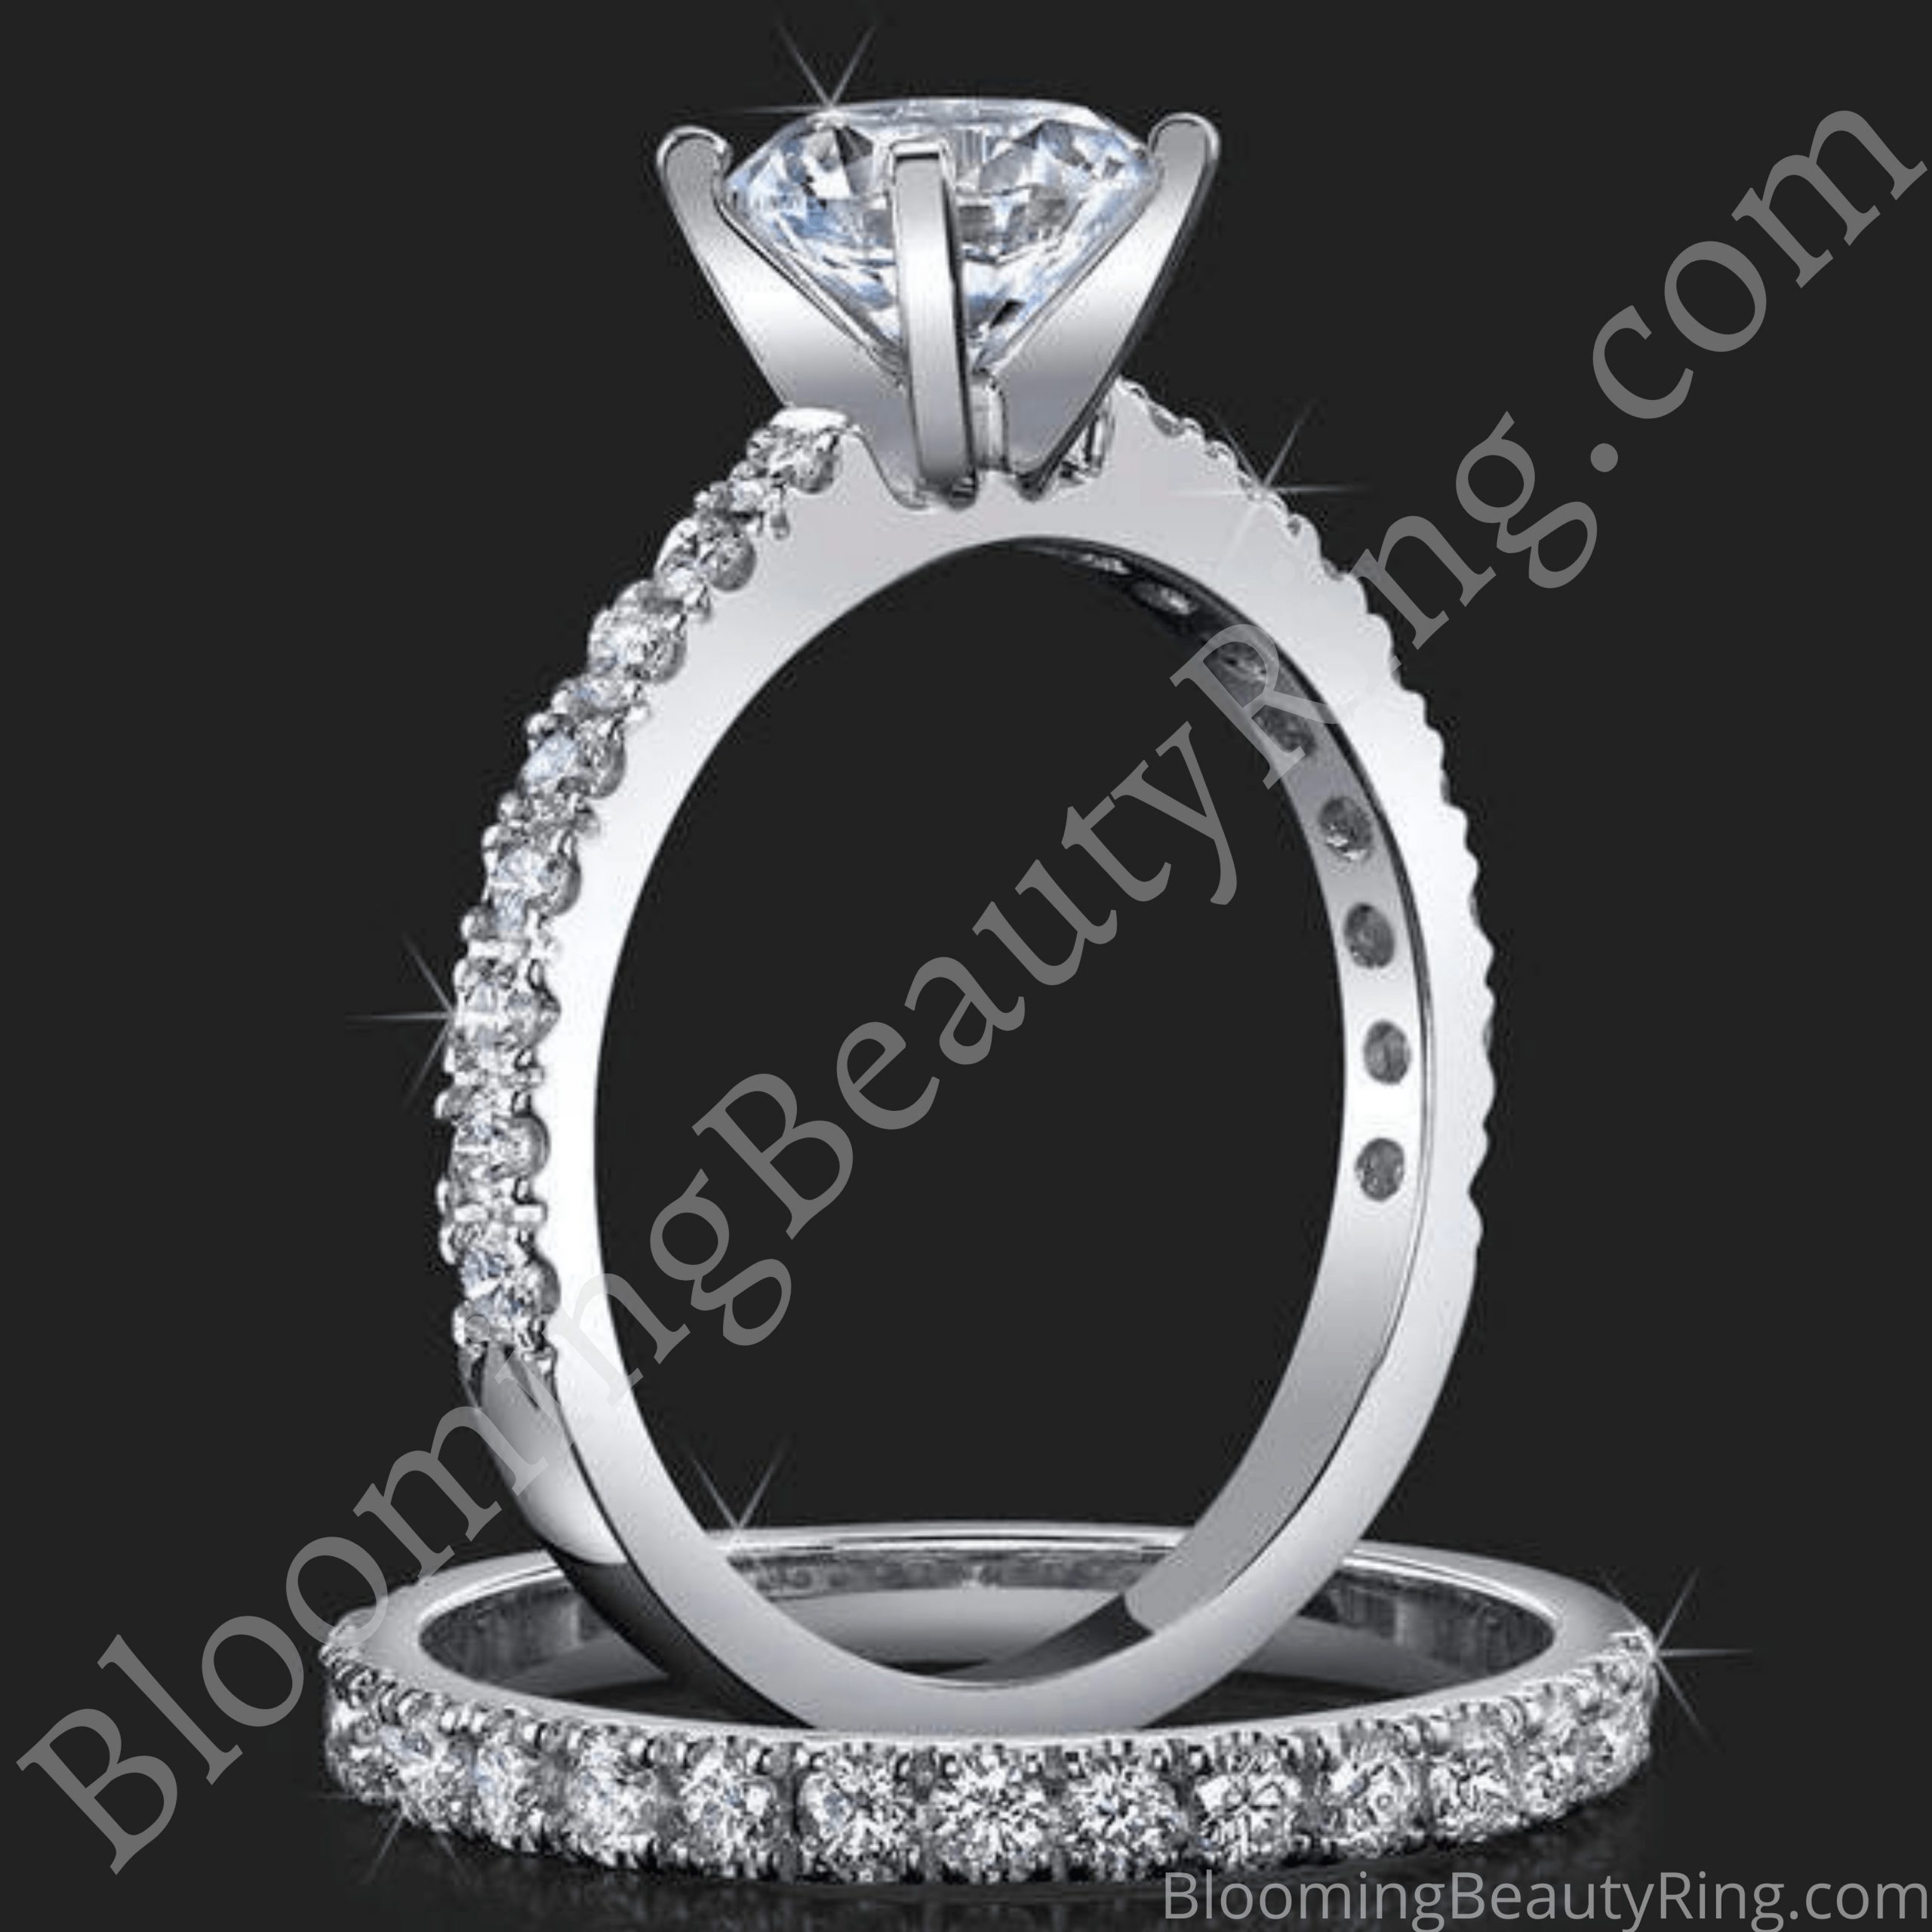 Jewelers Delicate French Cut Pave Engagement Rings with Medium Thick Bands